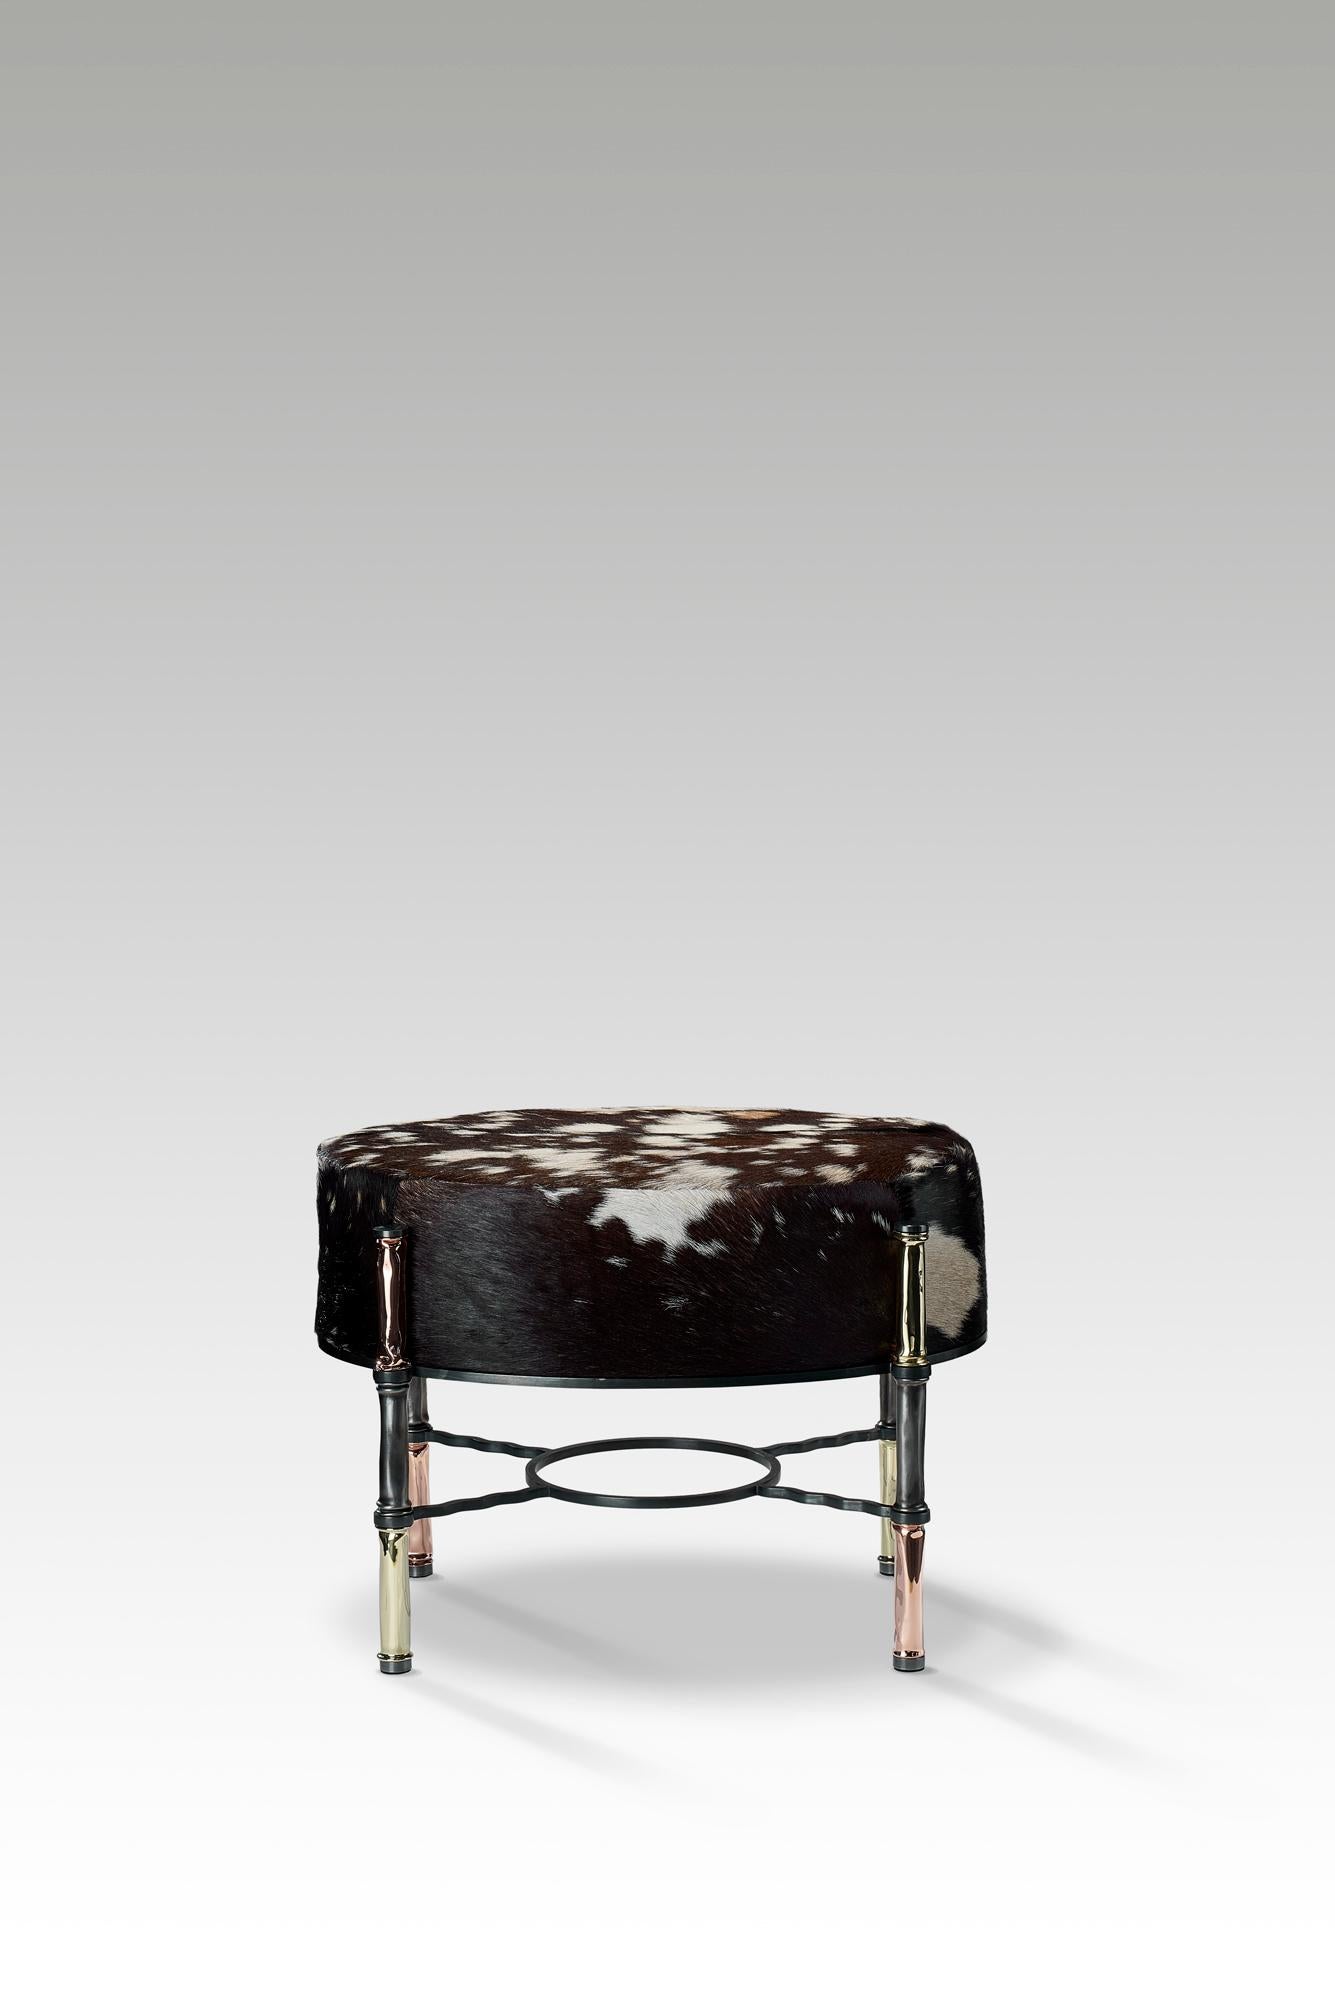 The trophy stool is unexpected and eye-catching, it is perfect as an ottoman or seating at a vanity or console.

Hand shaped, polished brass, copper and blackened steel details are paired with luxurious goat hide upholstery to create a modern